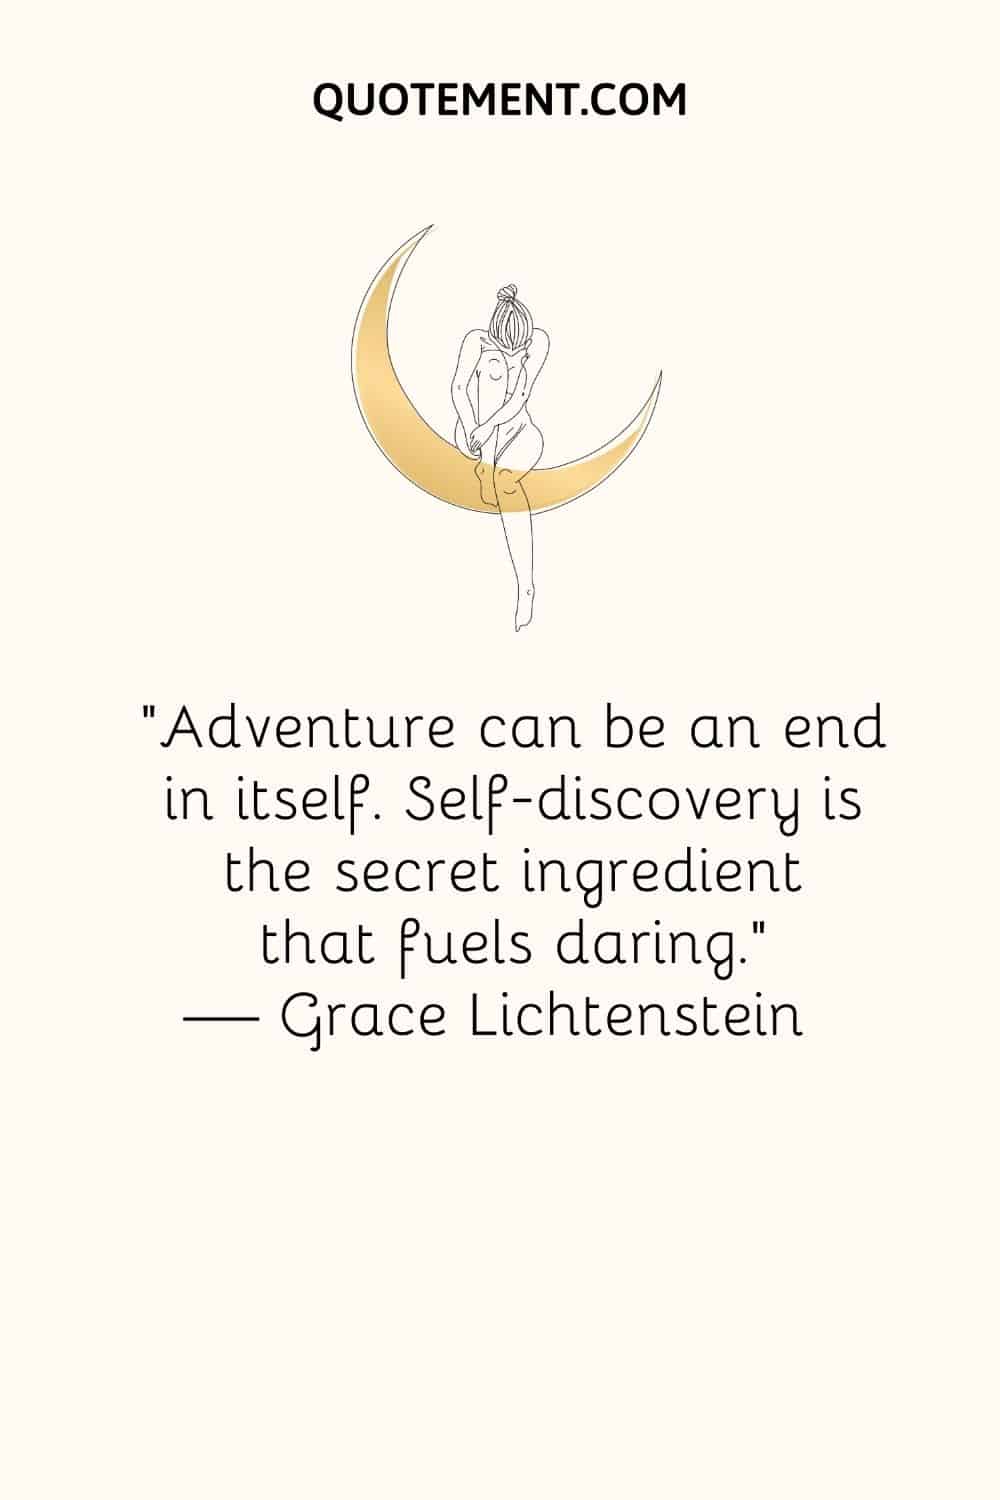 Adventure can be an end in itself. Self-discovery is the secret ingredient that fuels daring